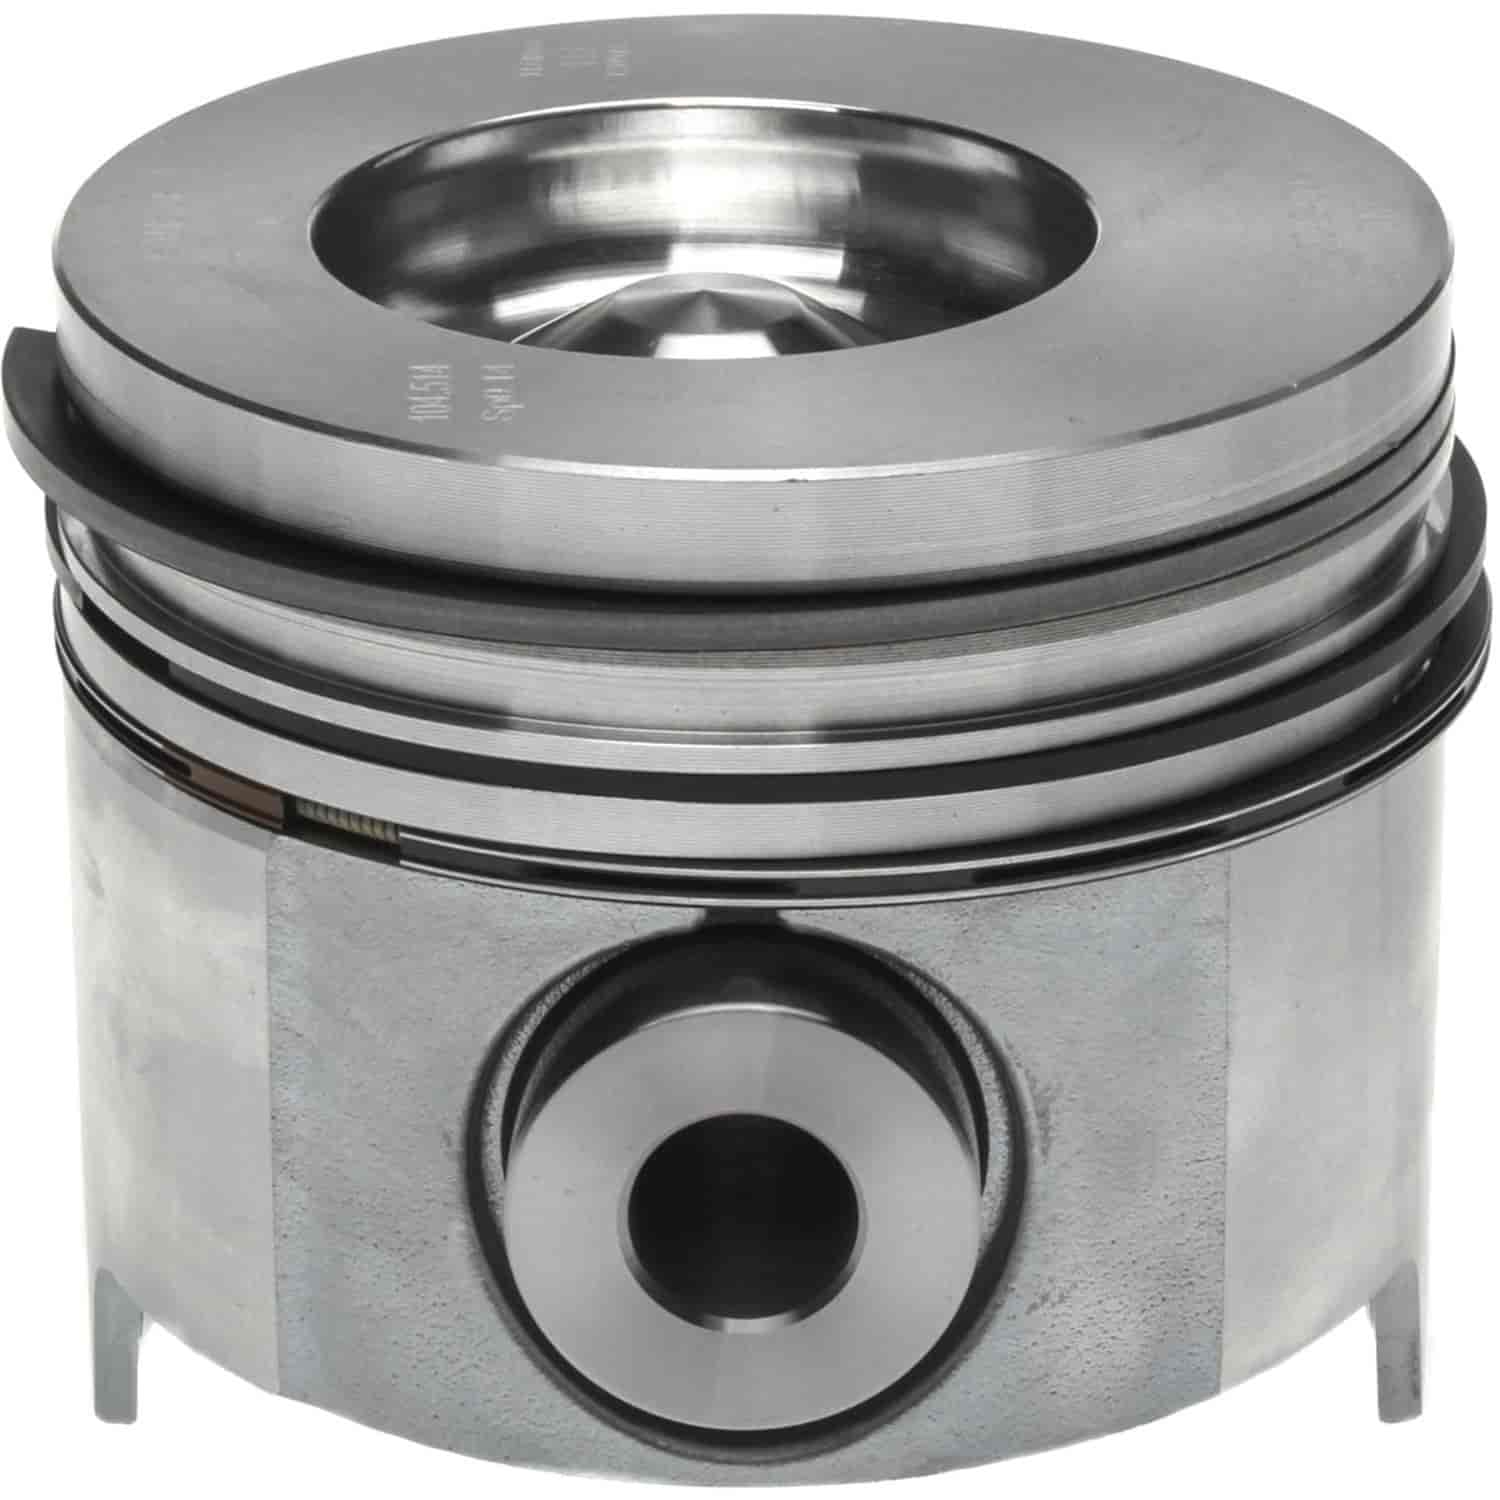 Piston and Rings Set 2001-2005 Chevy/GMC Duramax Diesel V8 6.6L Right Bank with 4.085" Bore (+.030")